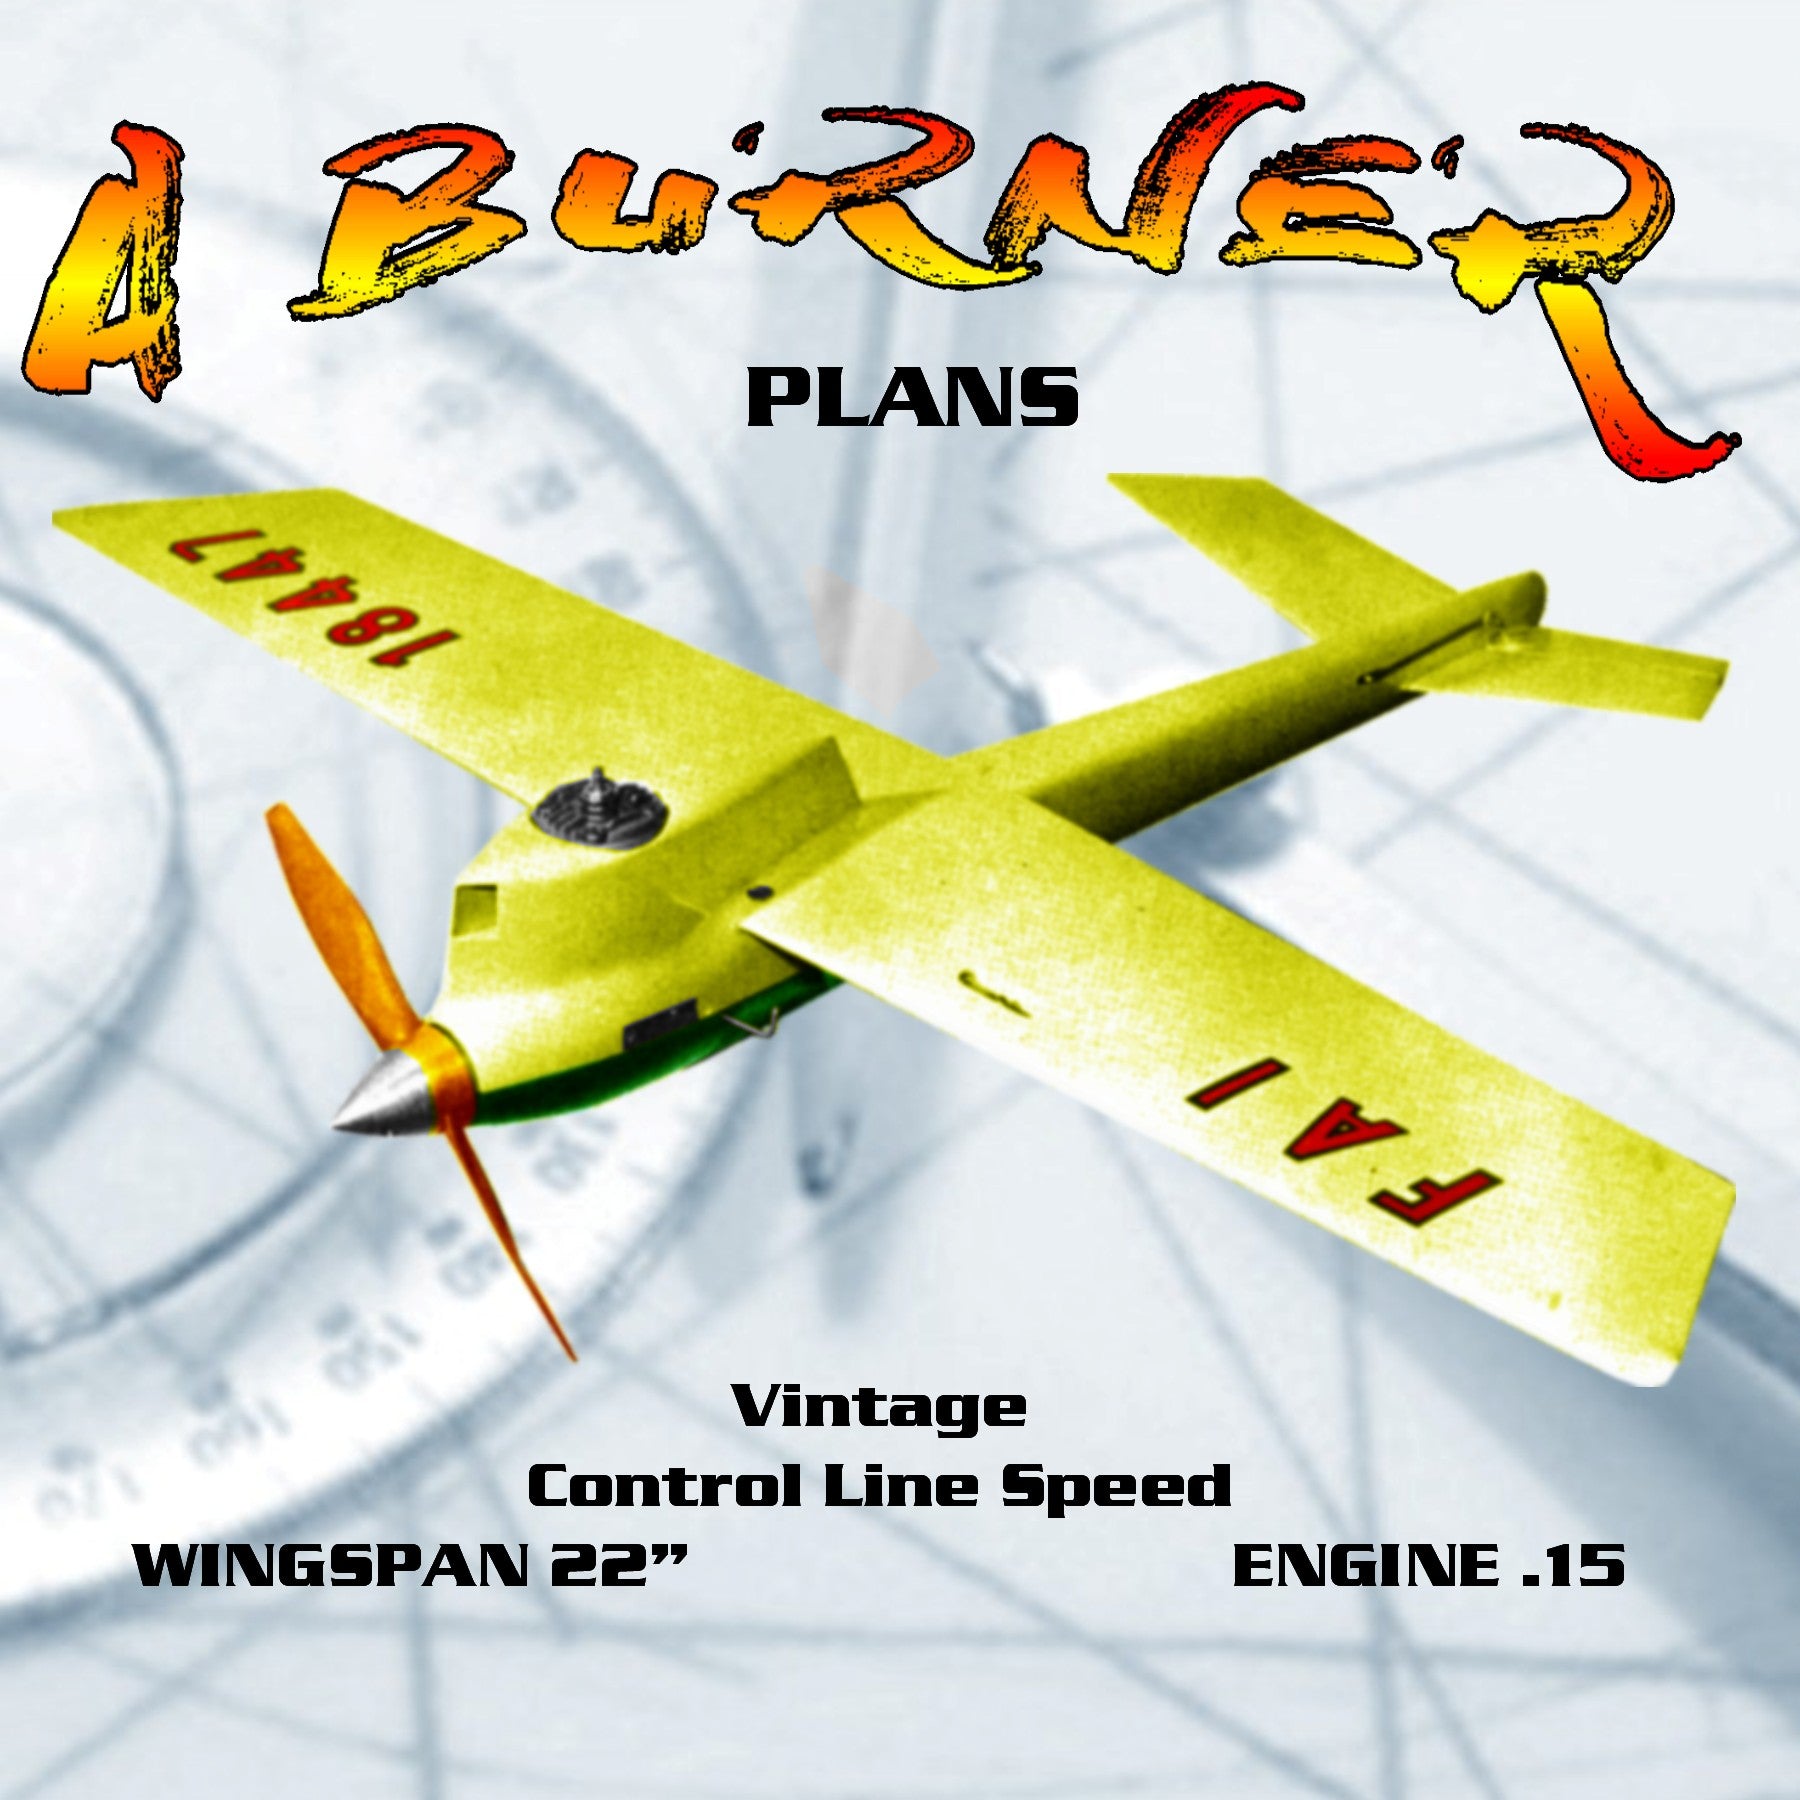 full size printed plan 1960 control line speed “ a burner ” fast proven design a.m.a. or fai events